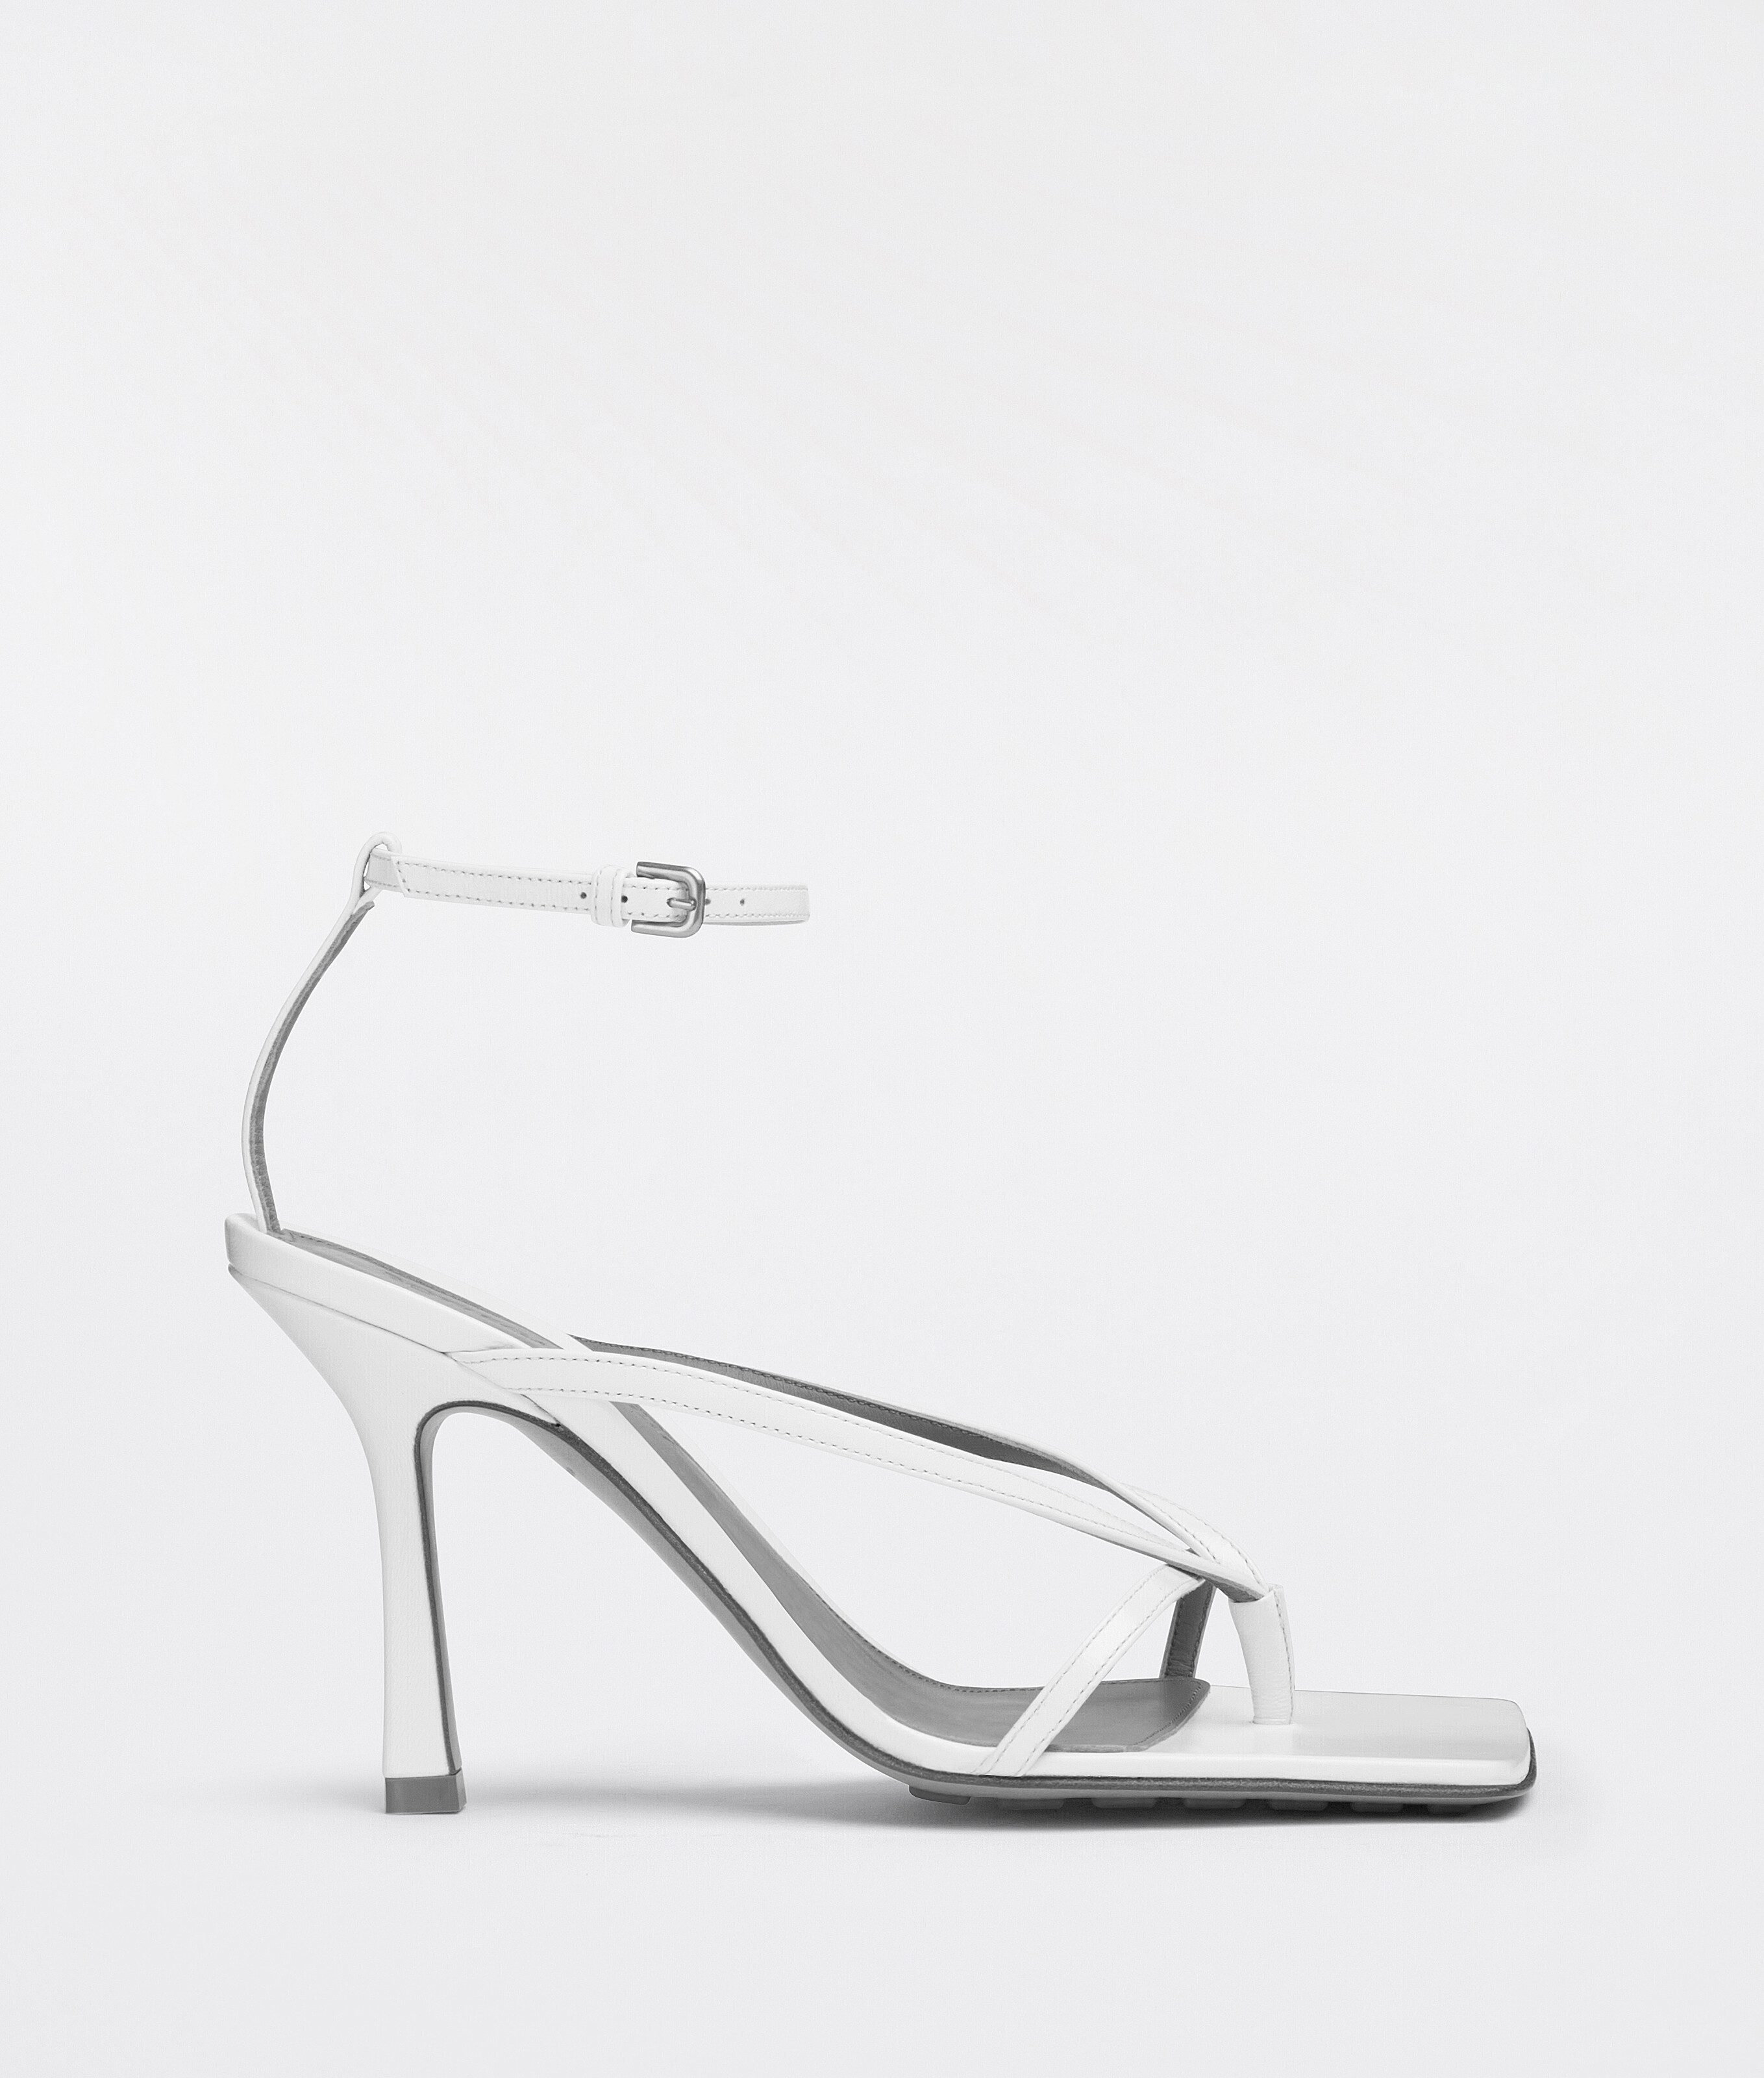 Stretching Leather Sandals | lupon.gov.ph